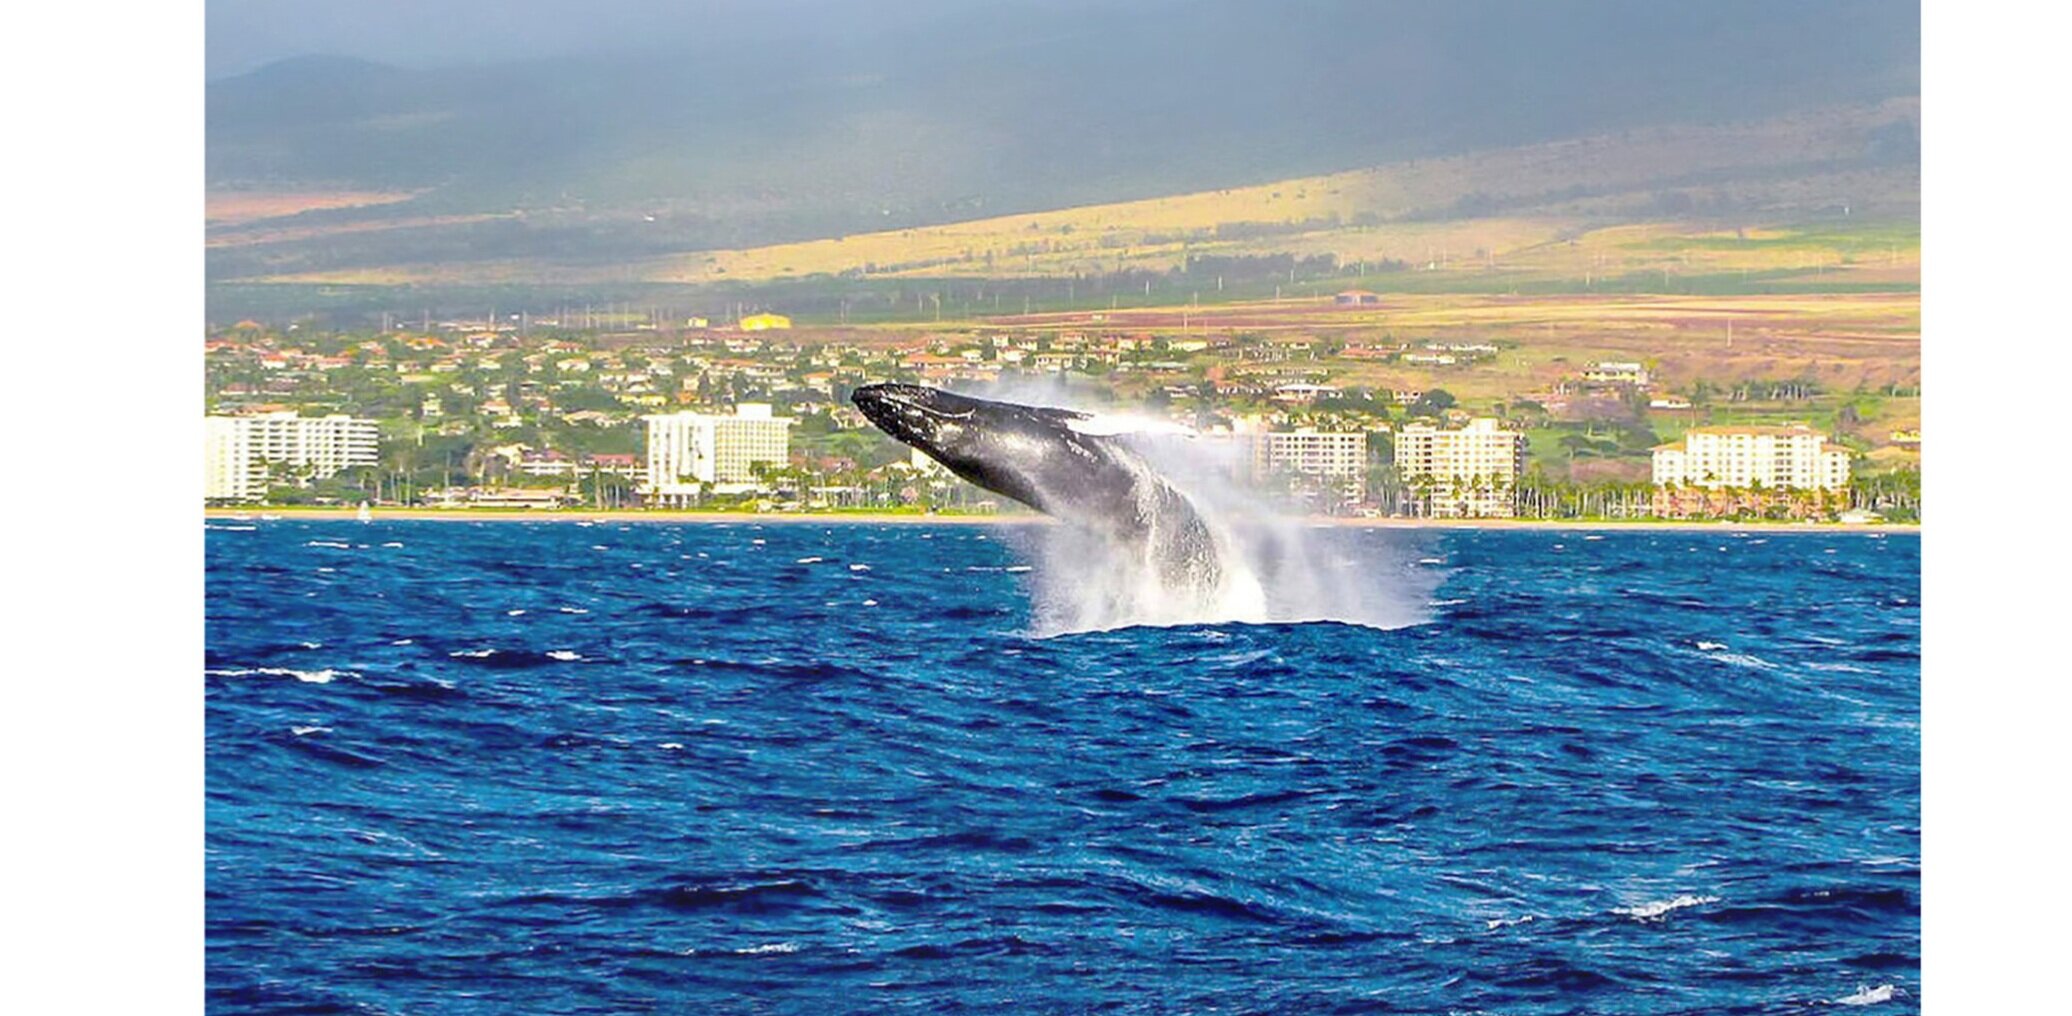 Chasing Whales off the Kaanapali Coast of Maui